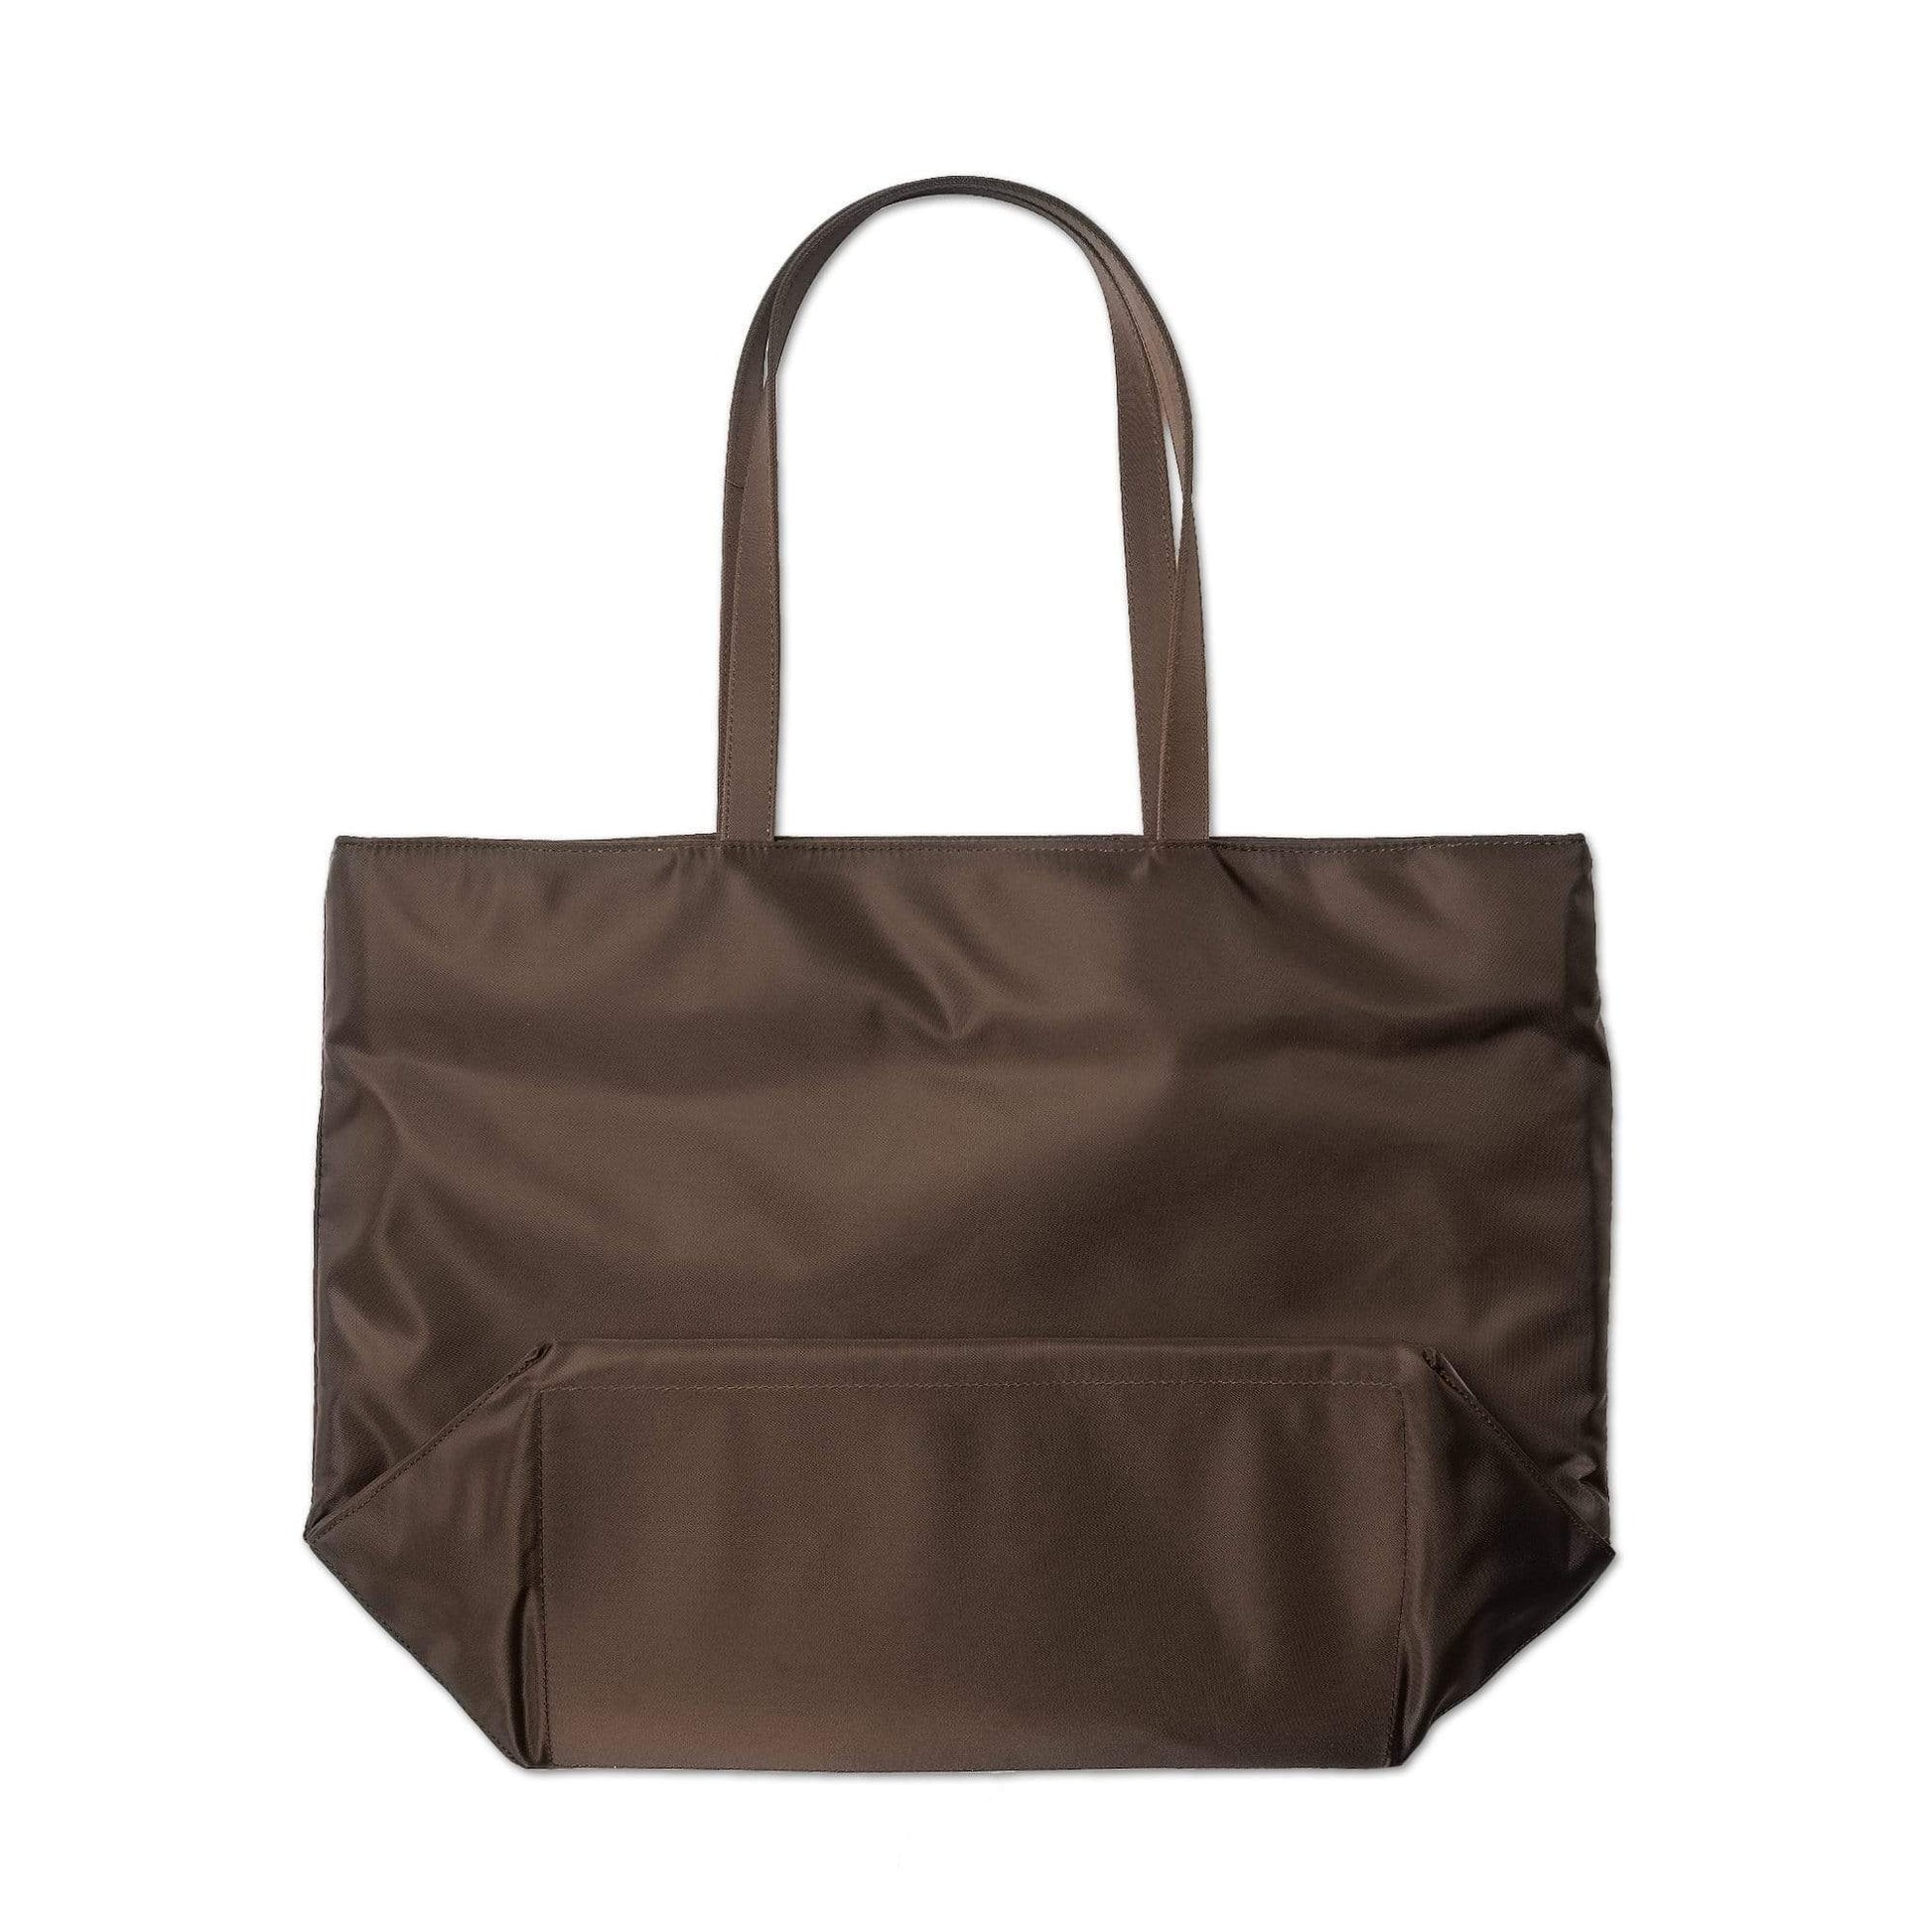 undercover future is the past tote bag (dark brown) - ucy4b05-3 - a.plus - Image - 2